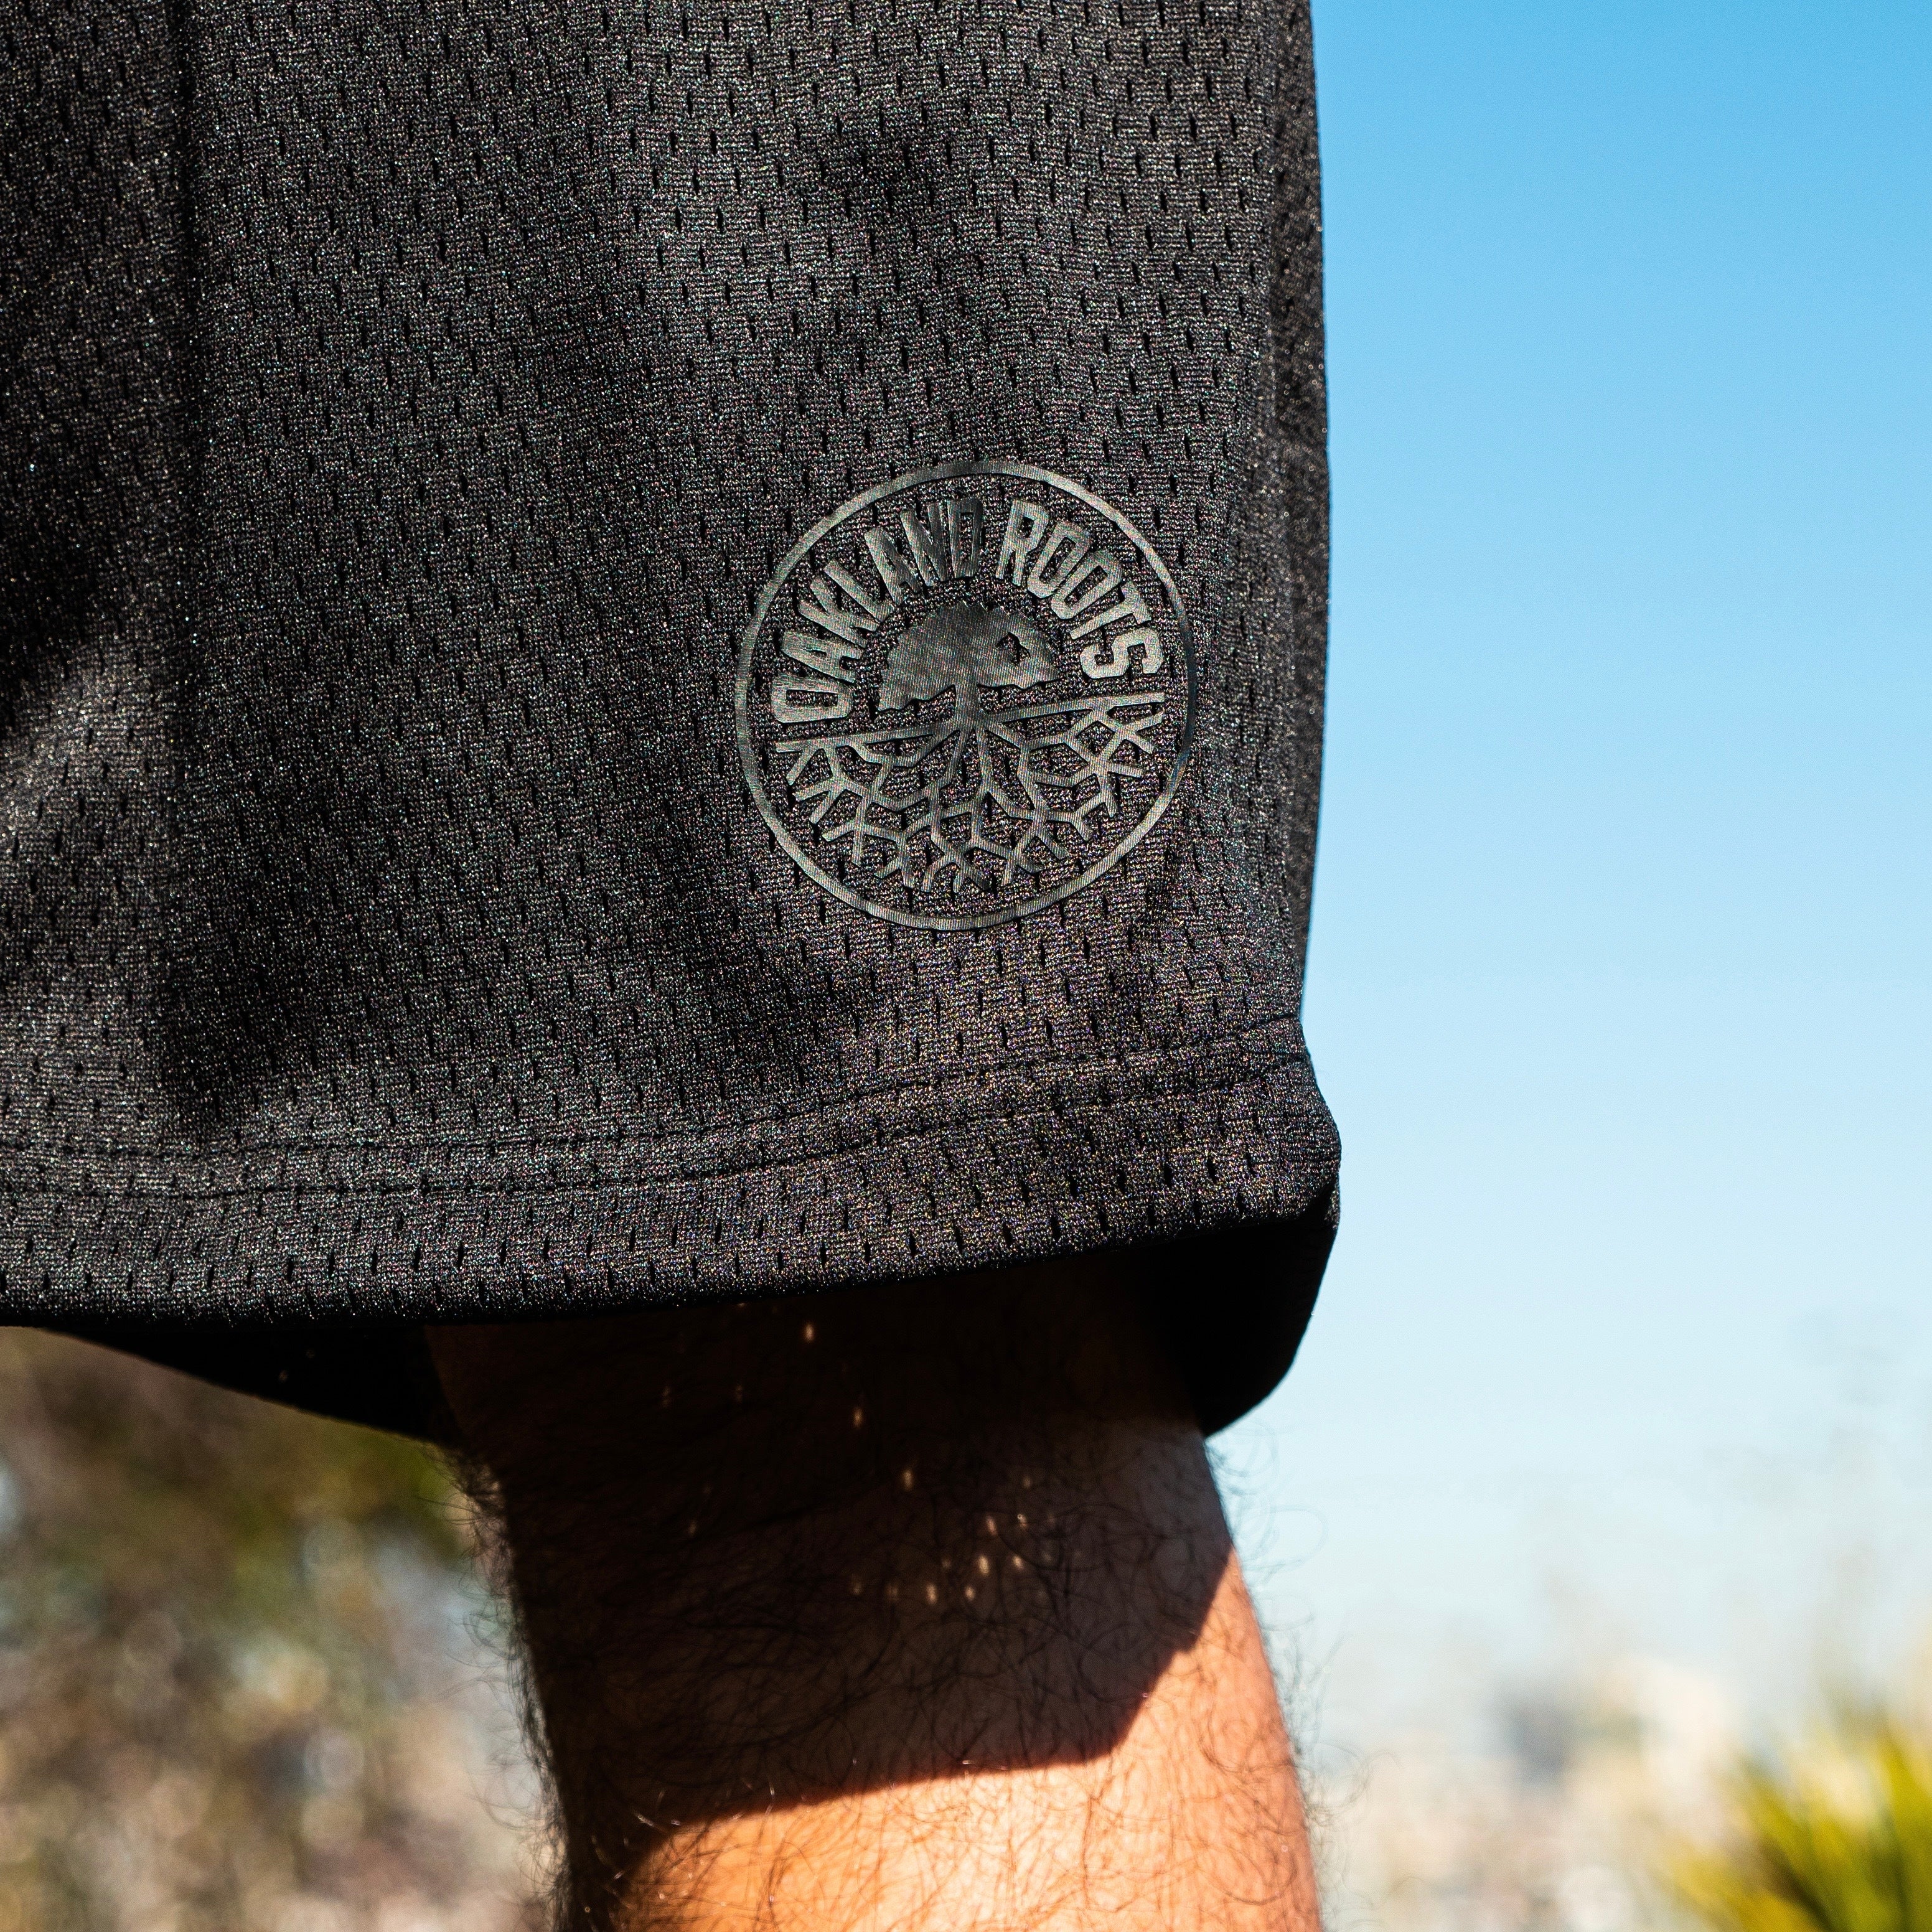 Close up of round Oakland Roots logo on shorts on a man’s leg outdoors with blue sky background.